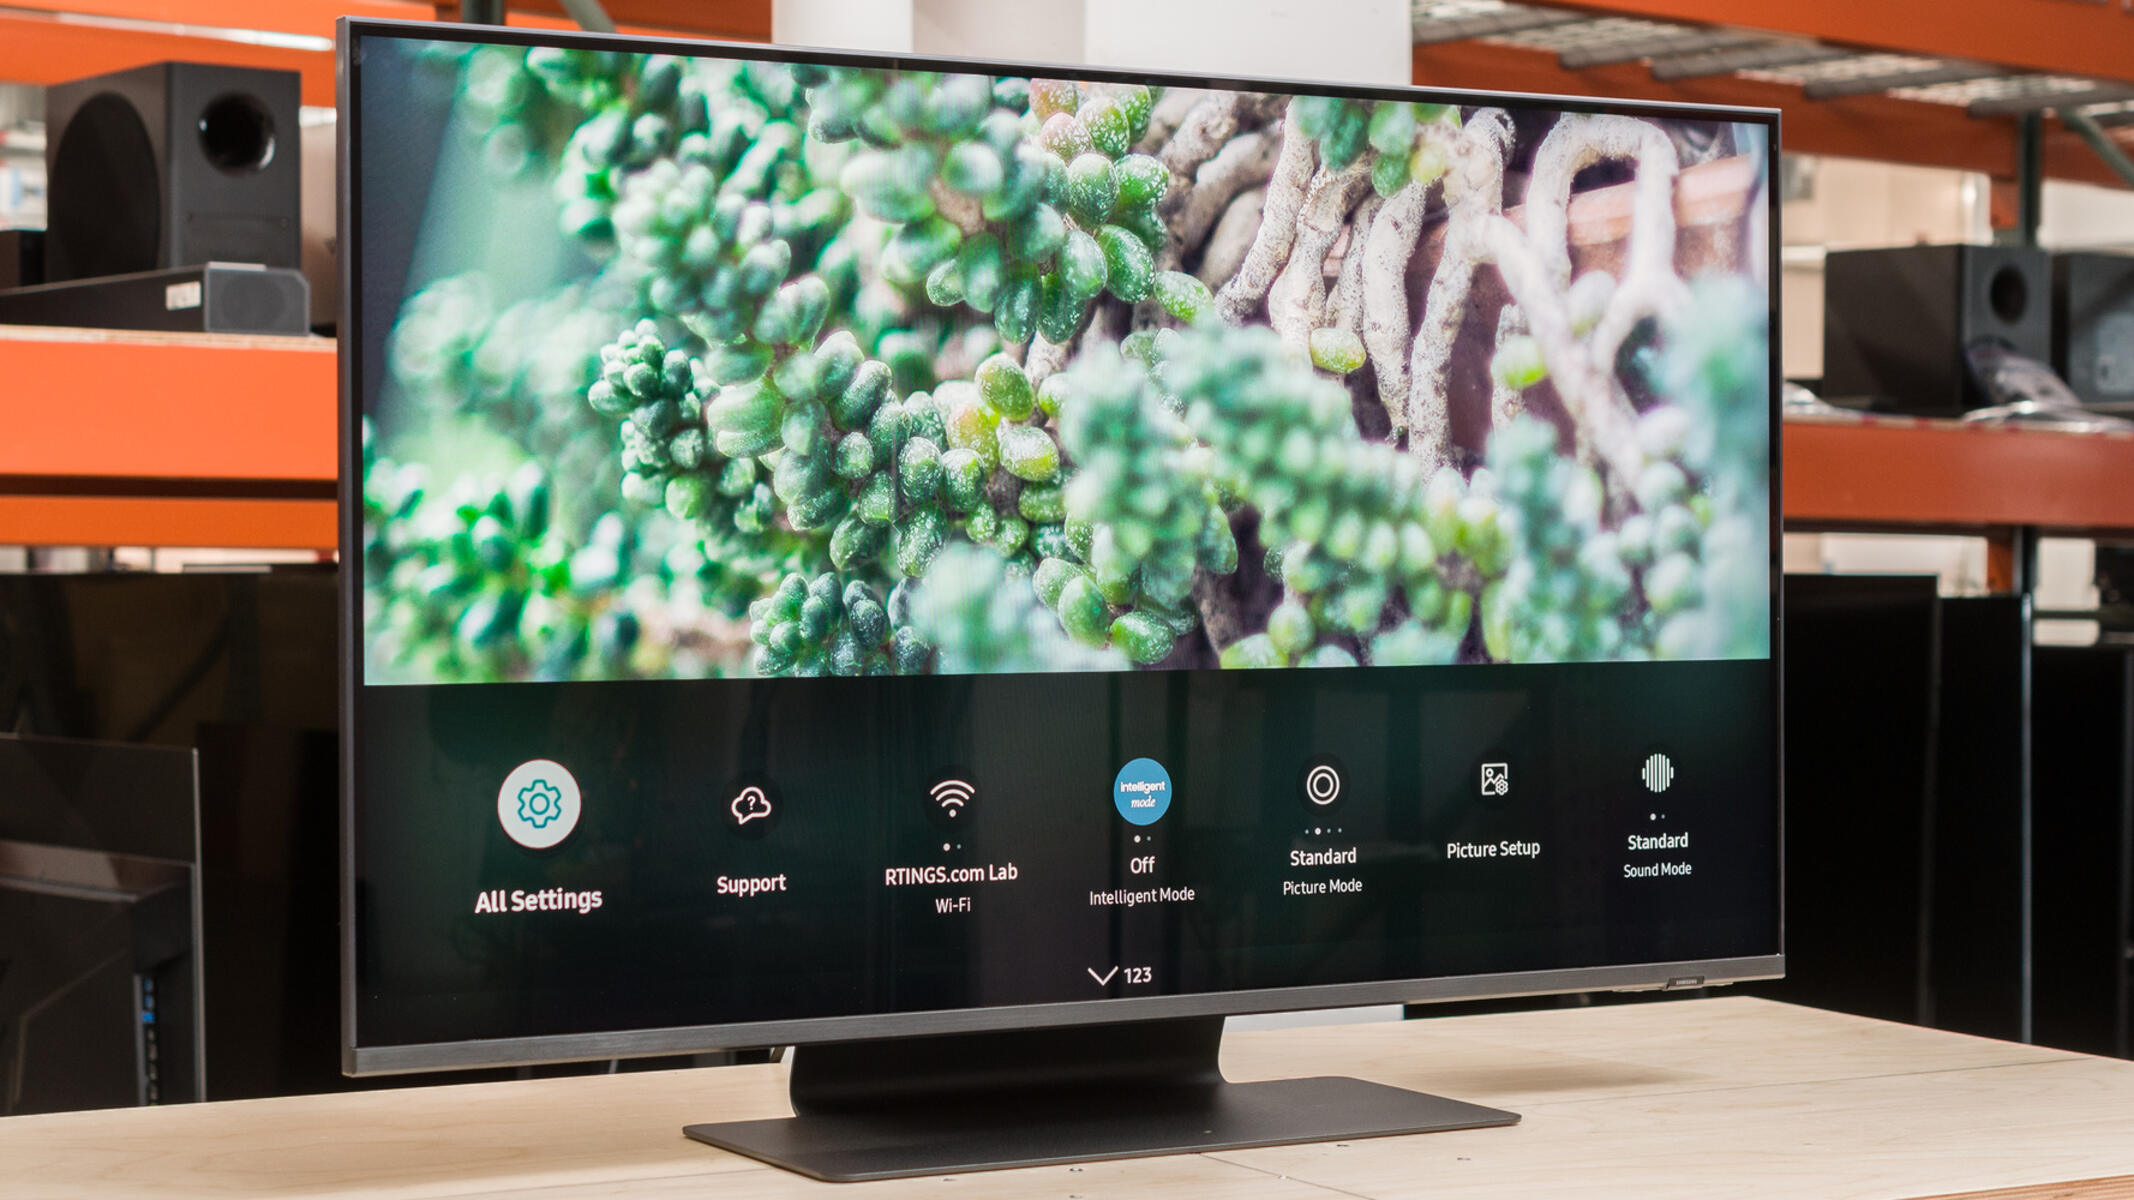 How To Fix A Blurry Screen On A Samsung QLED TV